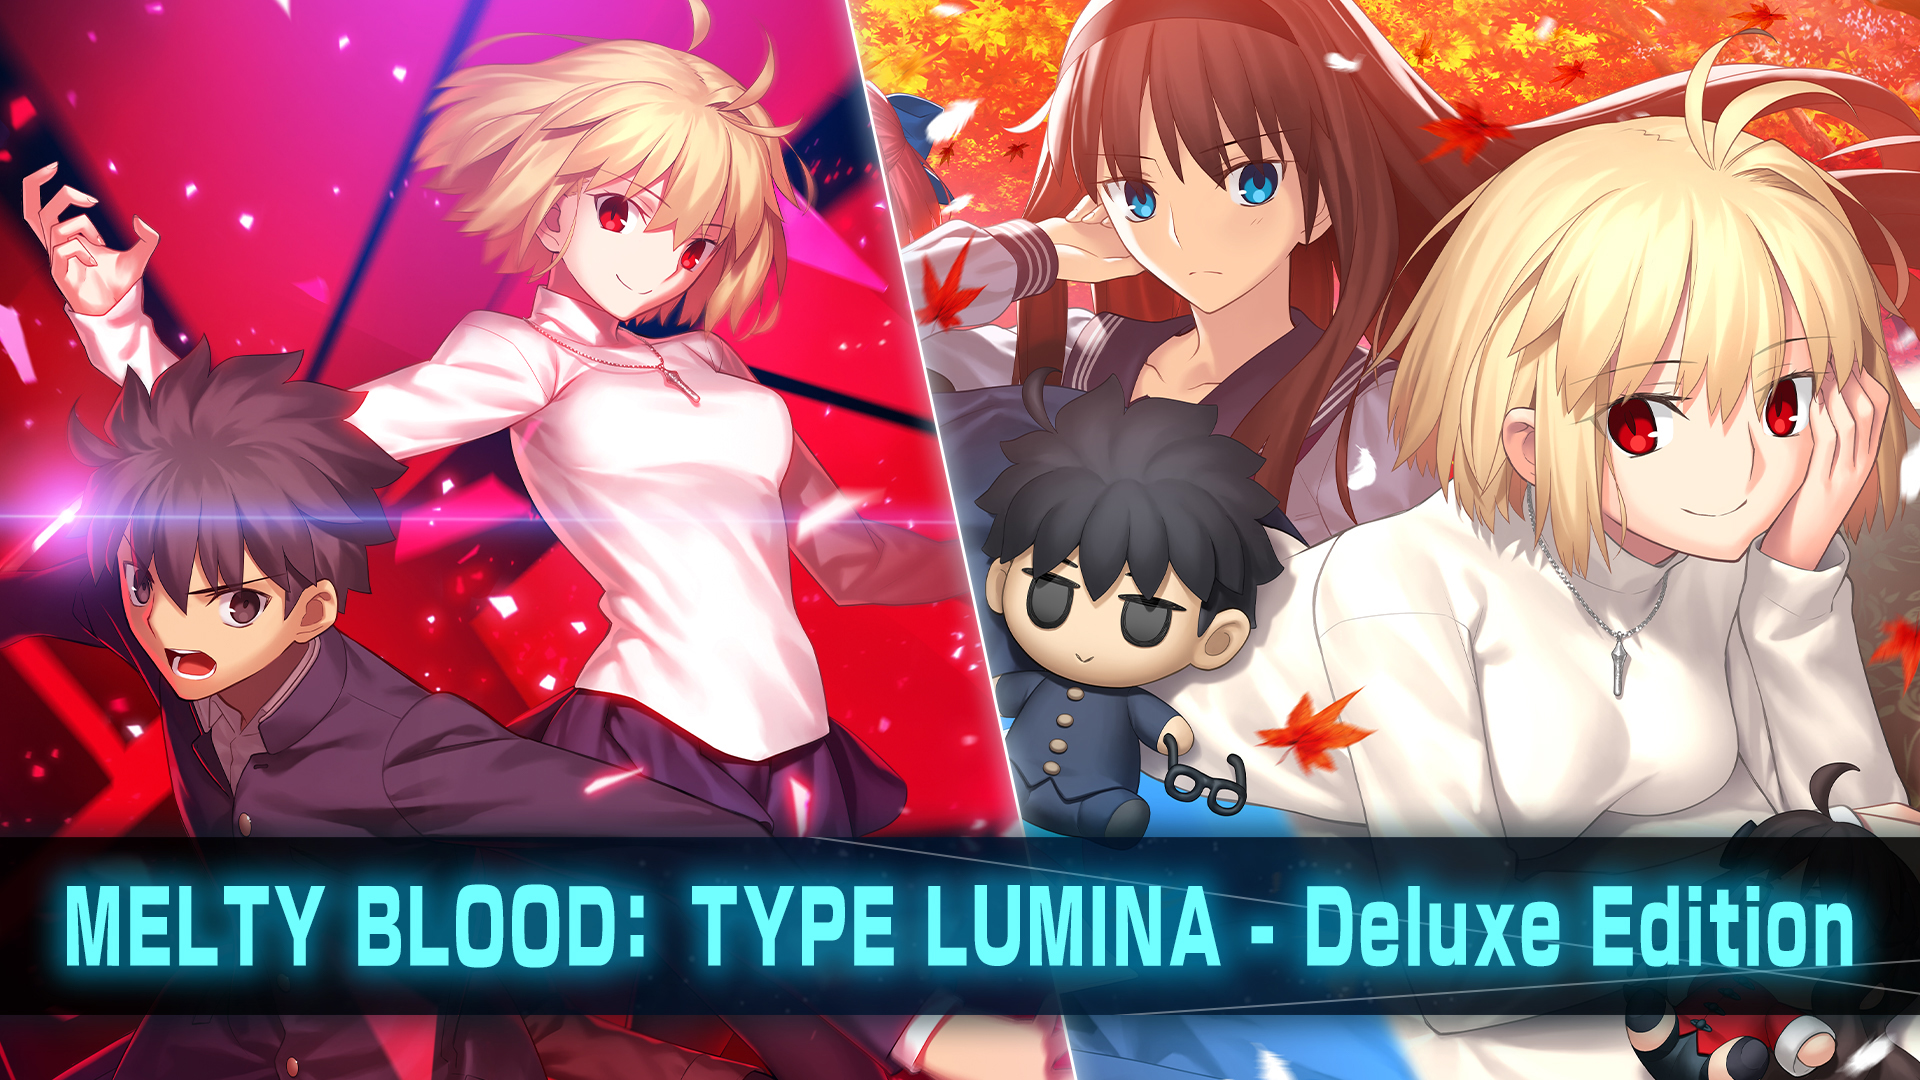 Nintendo Switch｜購買下載版軟體｜MELTY BLOOD: TYPE LUMINA - Deluxe Edition